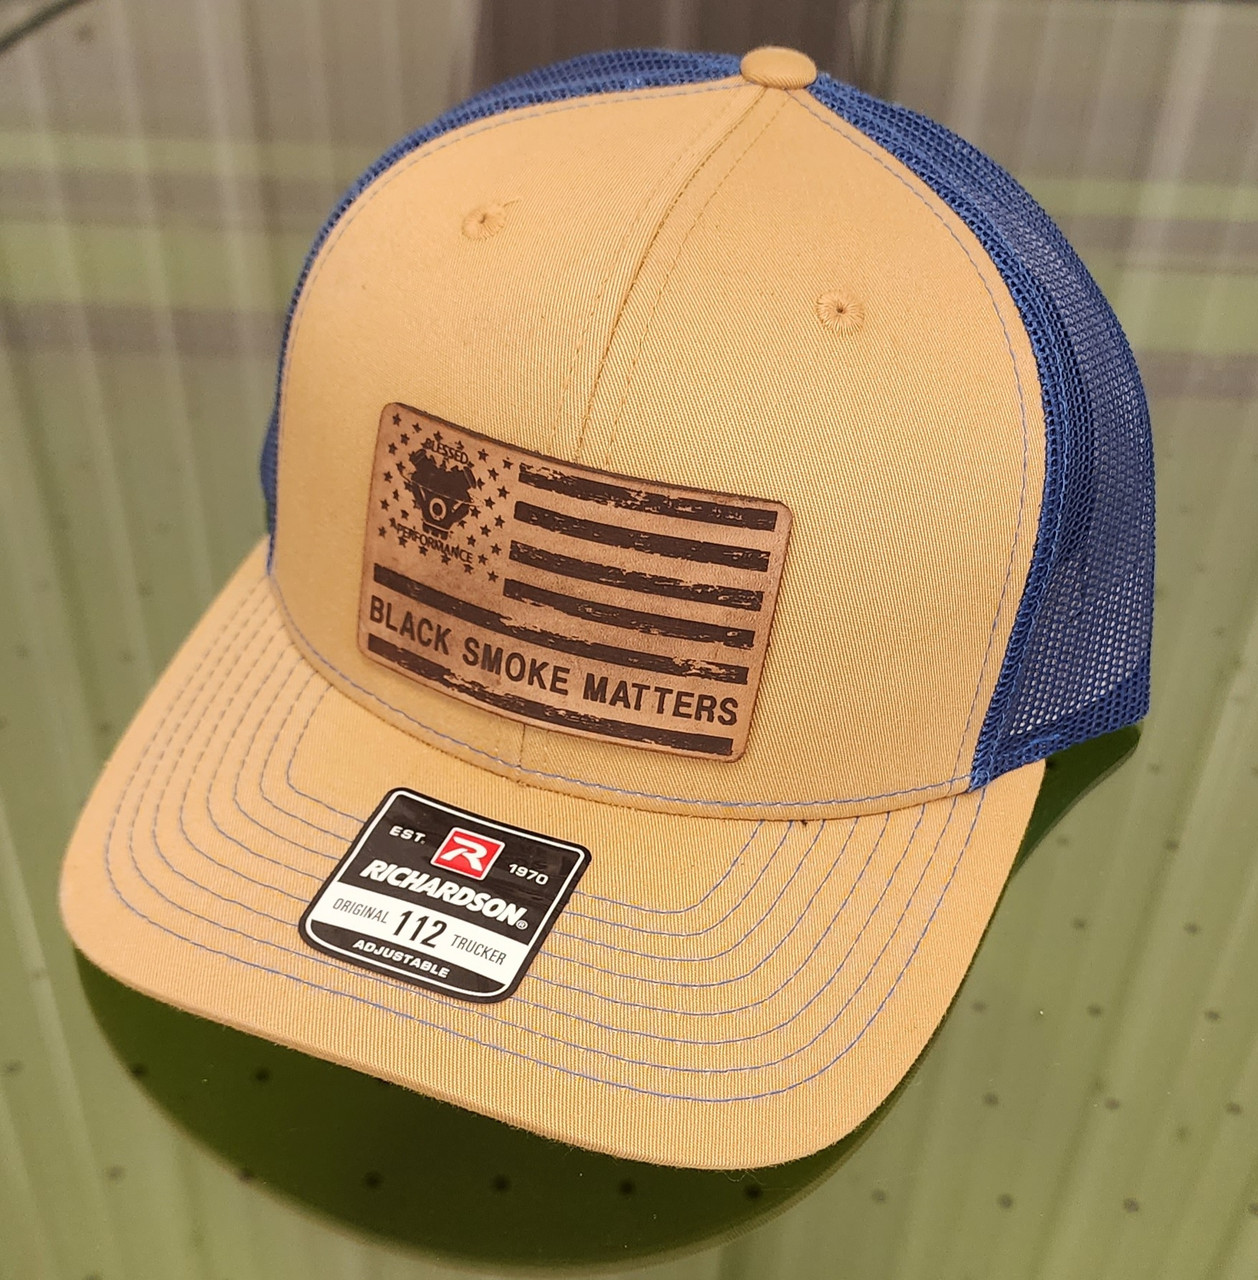 The Leather Patch "BLACK SMOKE MATTERS" Western Tan Blues Snapback created by Blessed Performance exclusively for the hardest working truck owners. #diesel